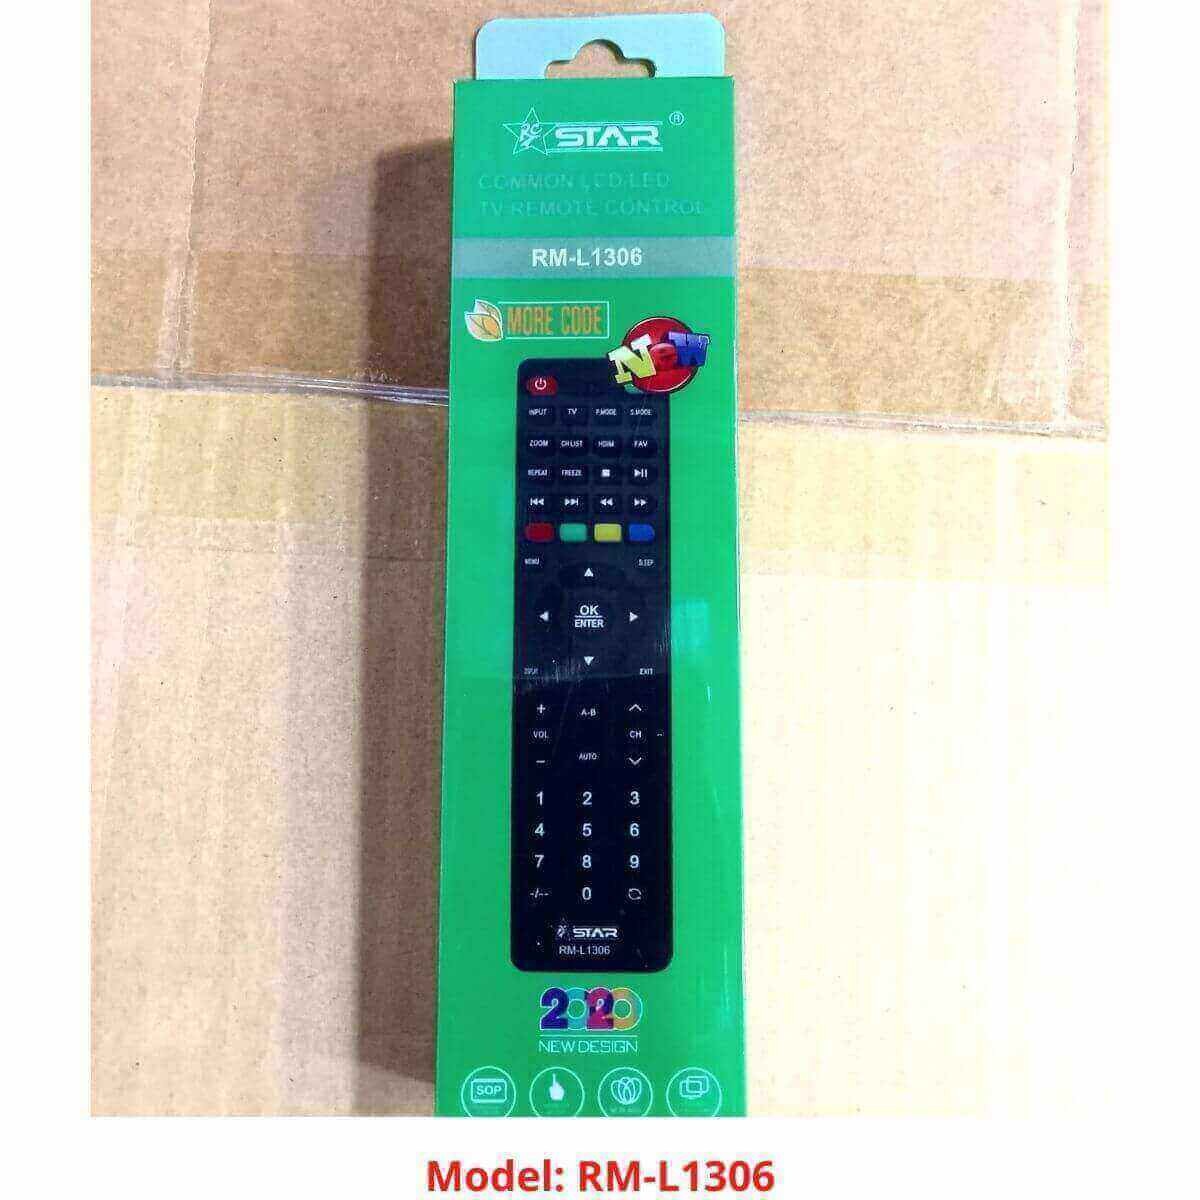 COMMON LCD LED TV REMOTE STAR RM-L1306 BD